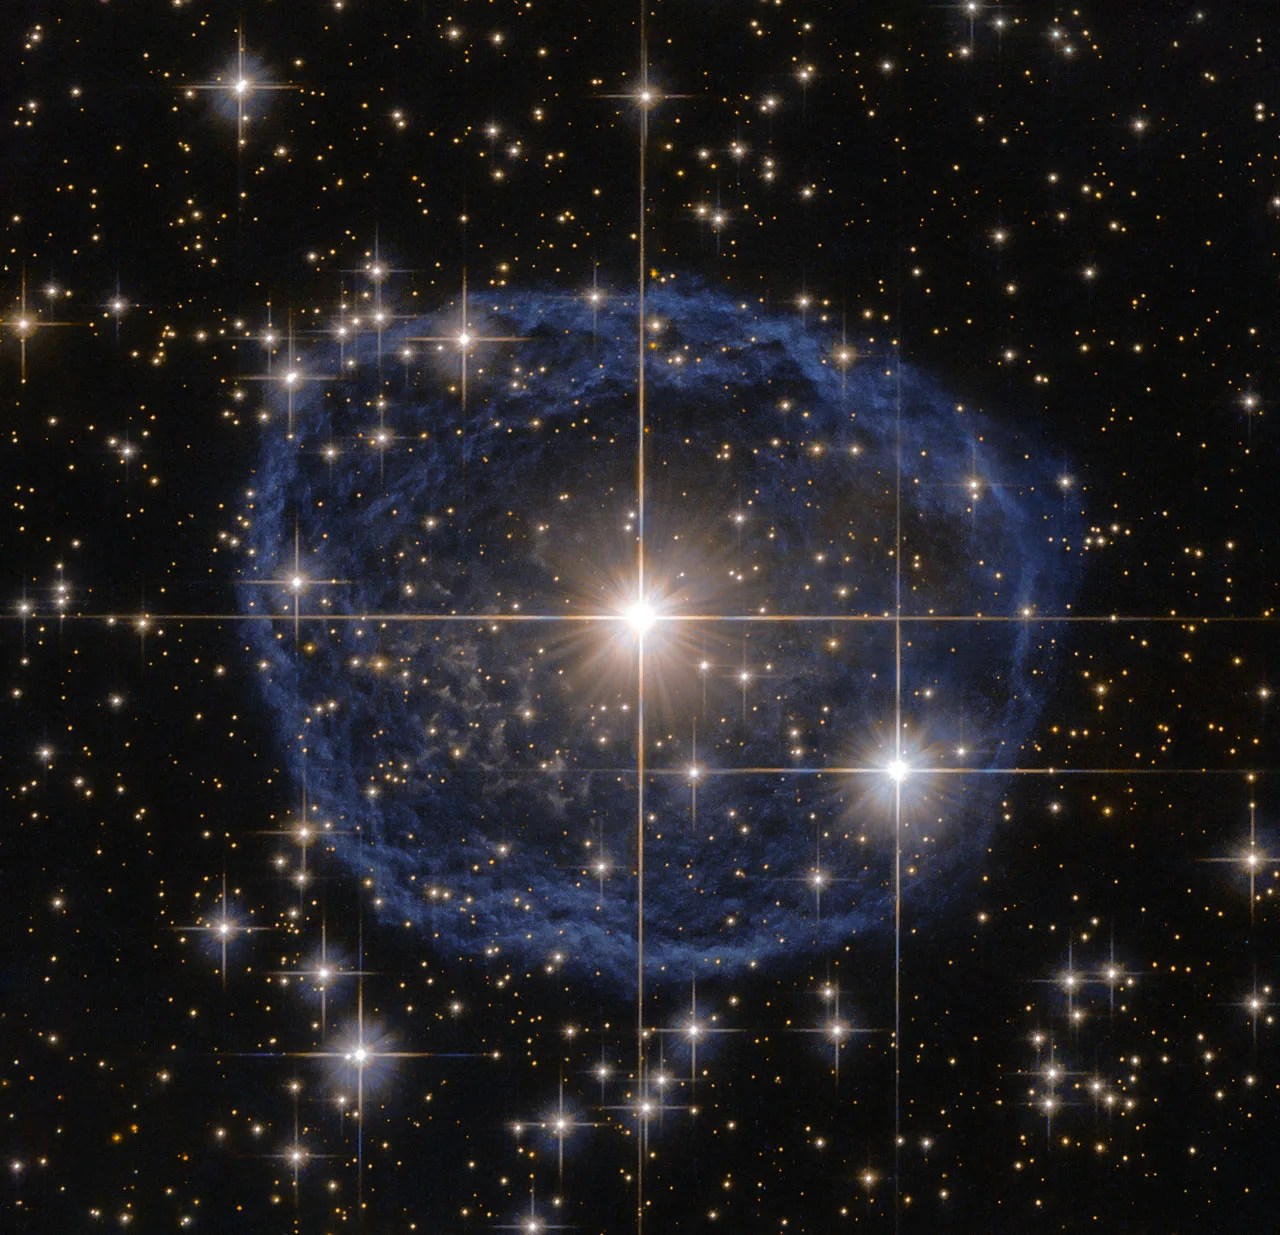 A large blue bubble with a bright star in the center on a black background filled with stars